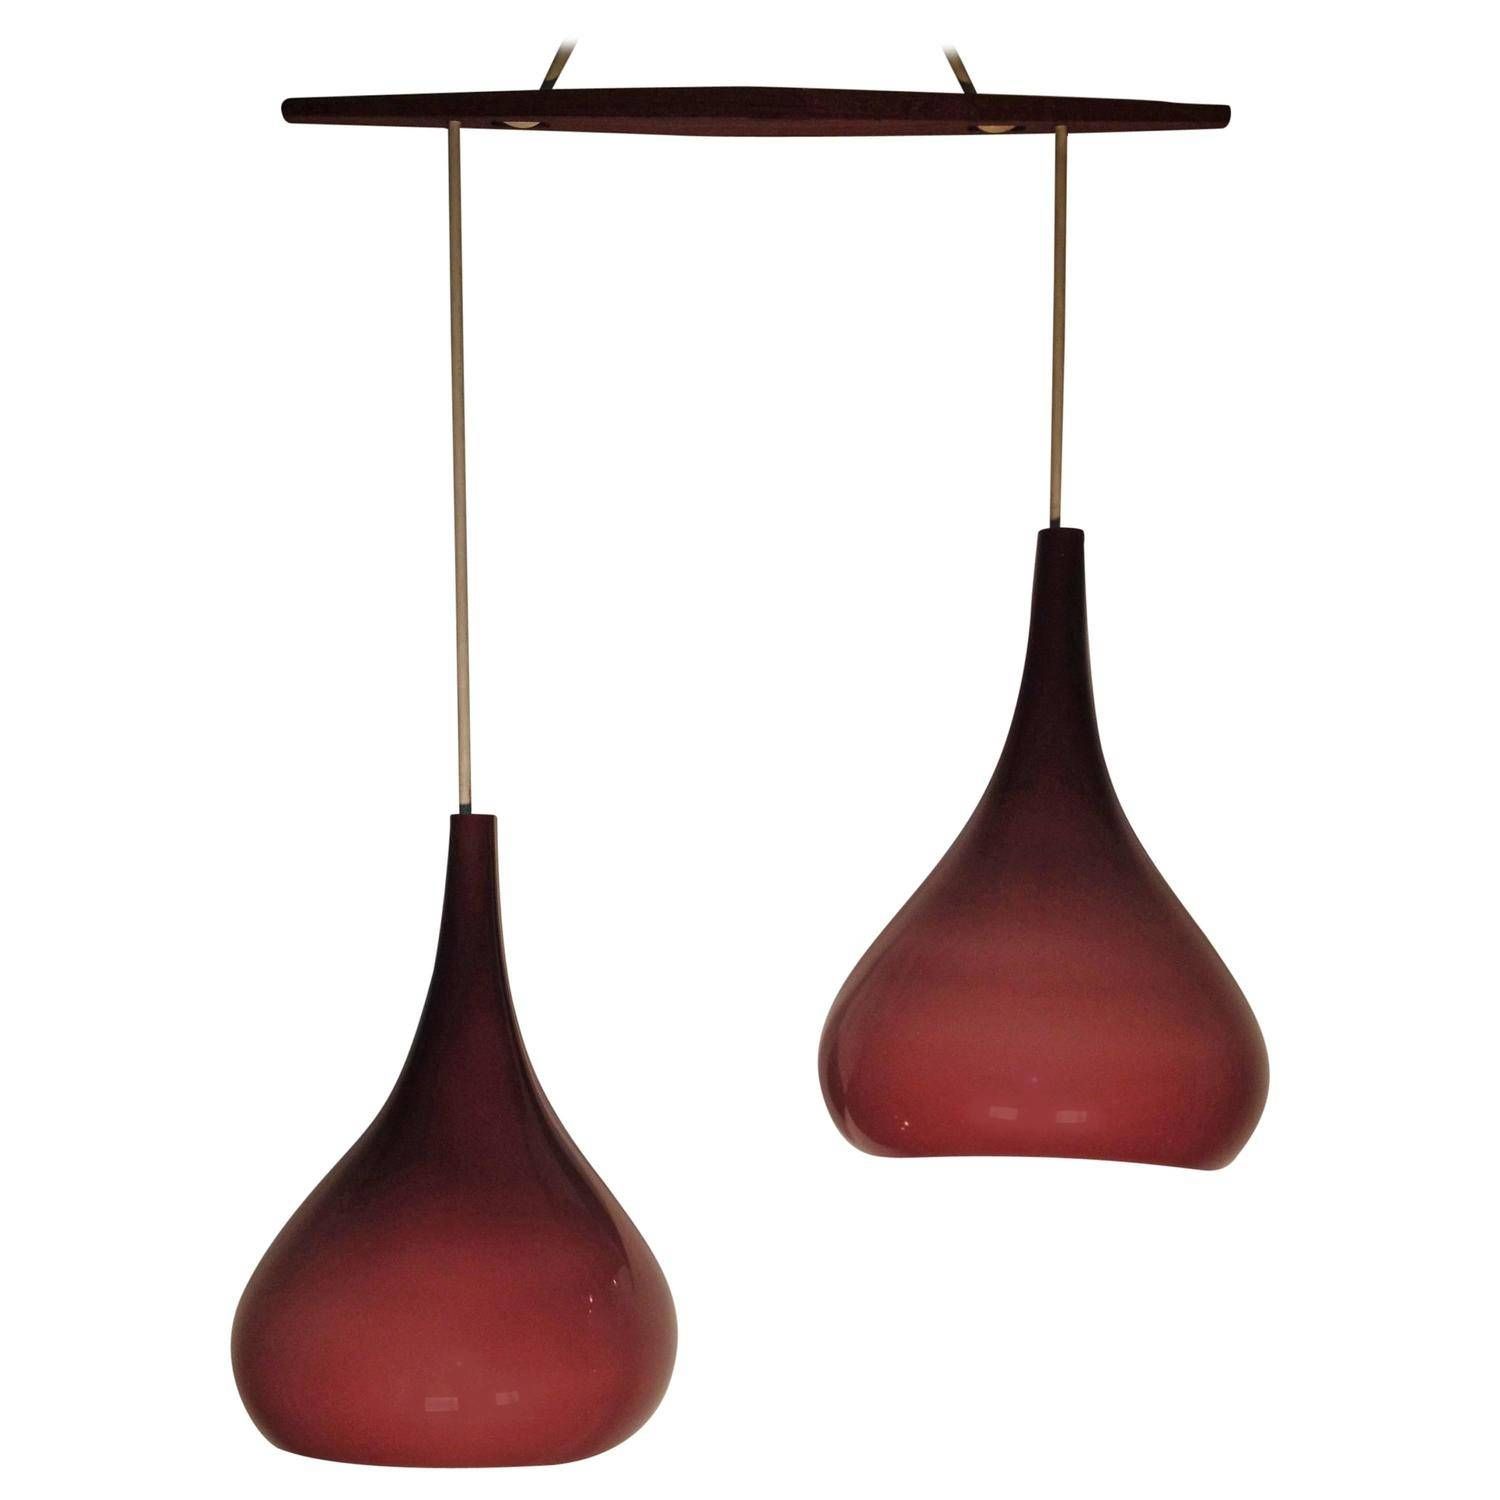 Exceptional 1960s Scandinavian Cased Glass Pendant Light Pertaining To 1960s Pendant Lighting (View 4 of 15)